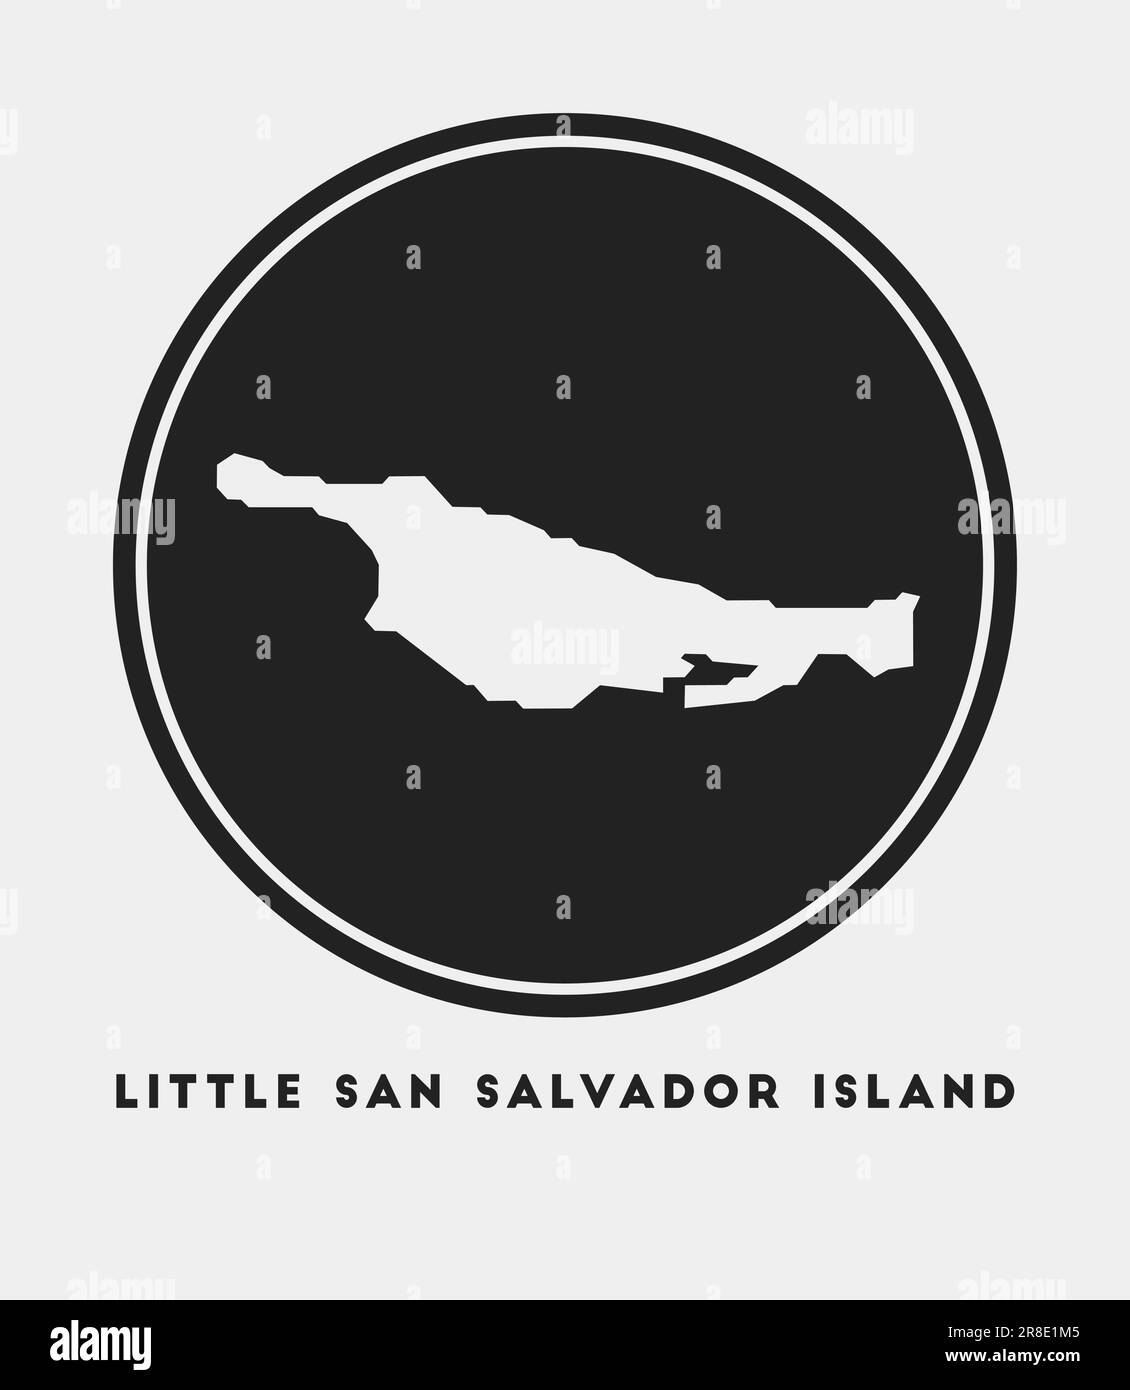 Little San Salvador Island icon. Round logo with border map and title. Stylish Little San Salvador Island badge with map. Vector illustration. Stock Vector